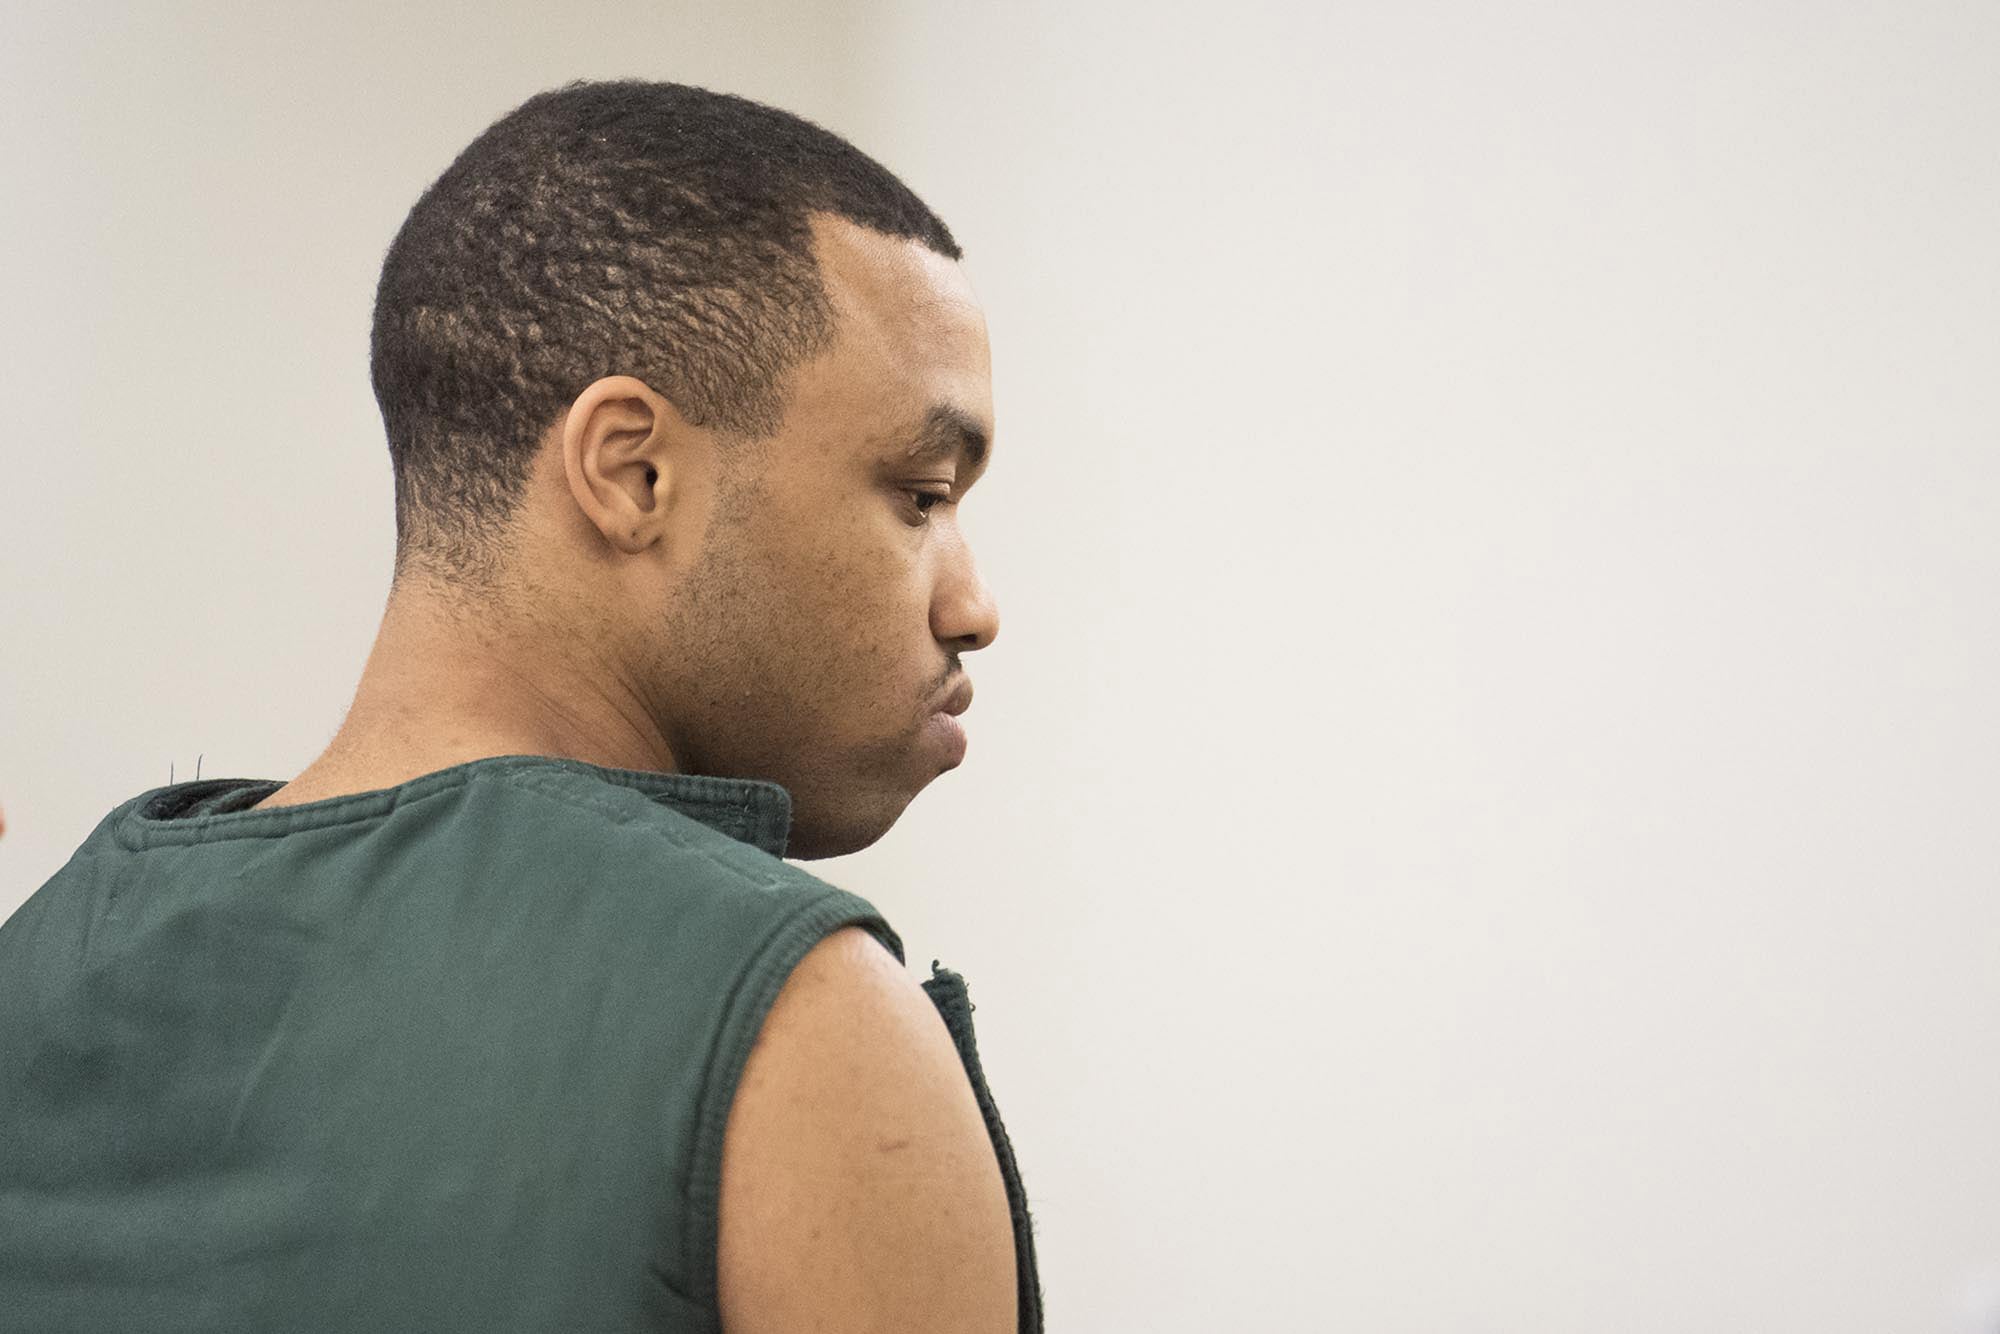 Brian C. Toombs, 28, appears in the Clark County Superior Court on Monday morning to face a charge of 1st-degree attempted domestic violence murder for allegedly stabbing his 57-year-old mother.